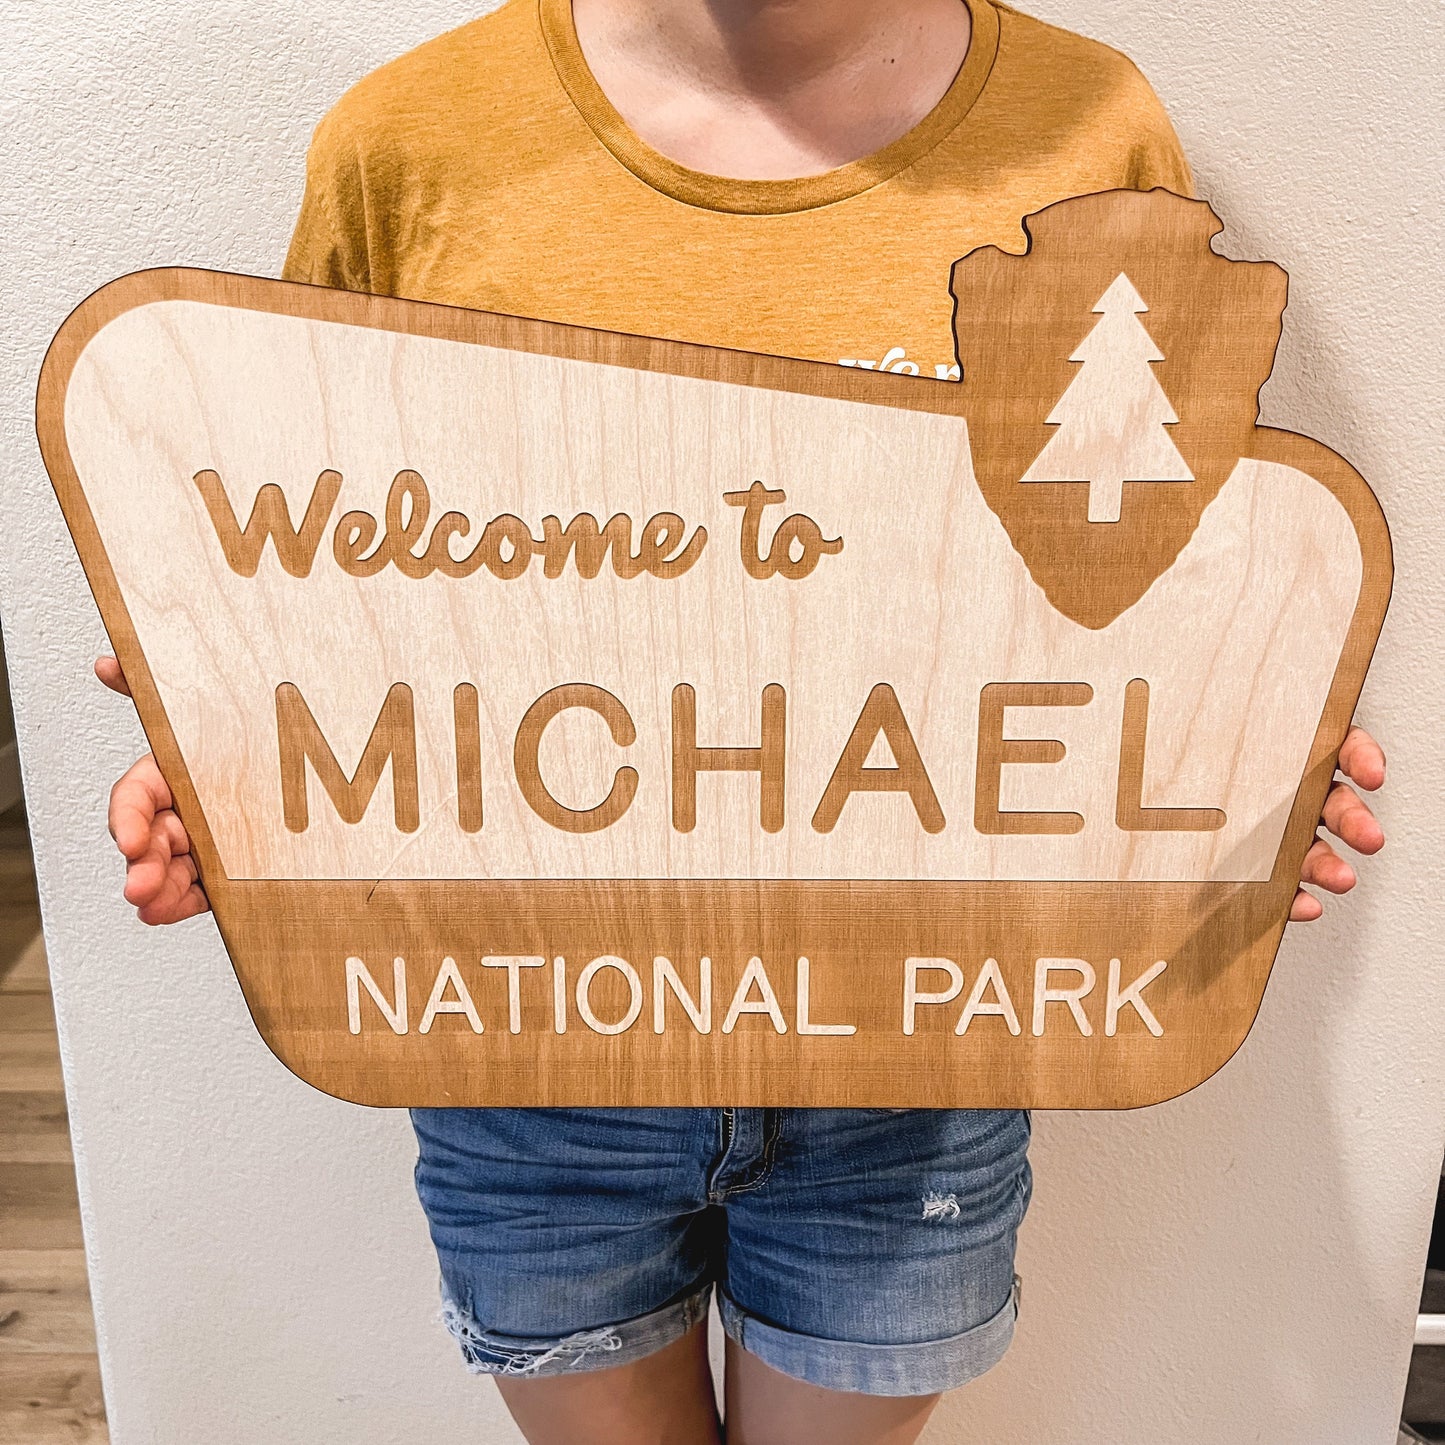 National Park Sign / Baby Name Sign / Last Name Sign / Wooden Name Sign / Baby Announcement Sign / Family Name Sign